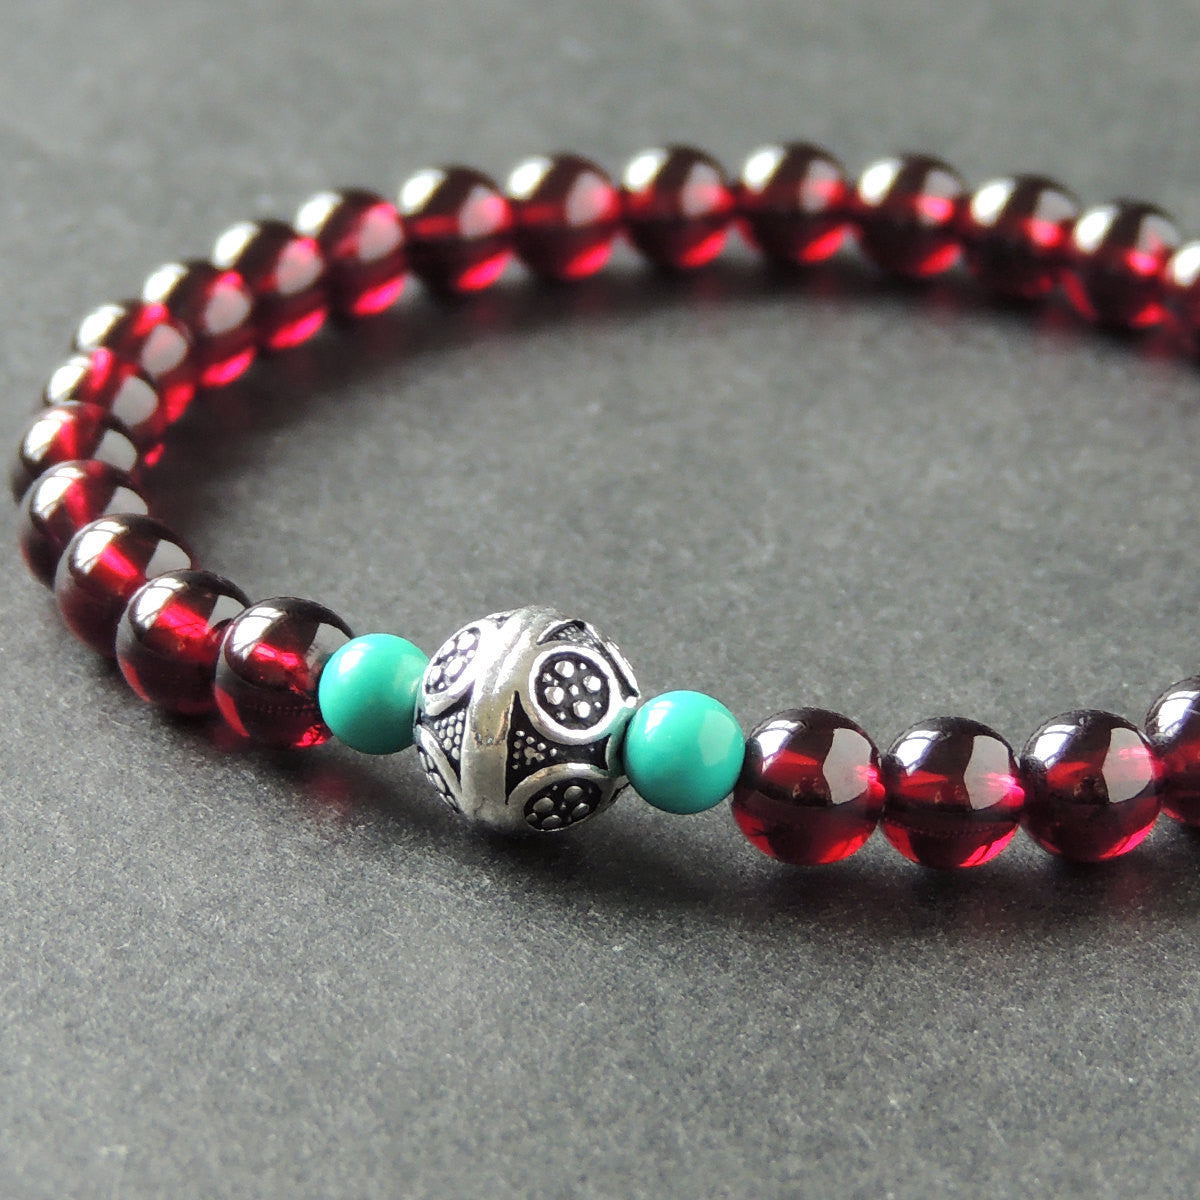 Enhanced Turquoise & Grade AAA Garnet Healing Gemstone Bracelet with S925 Sterling Silver Vintage Protection Bead - Handmade by Gem & Silver BR010